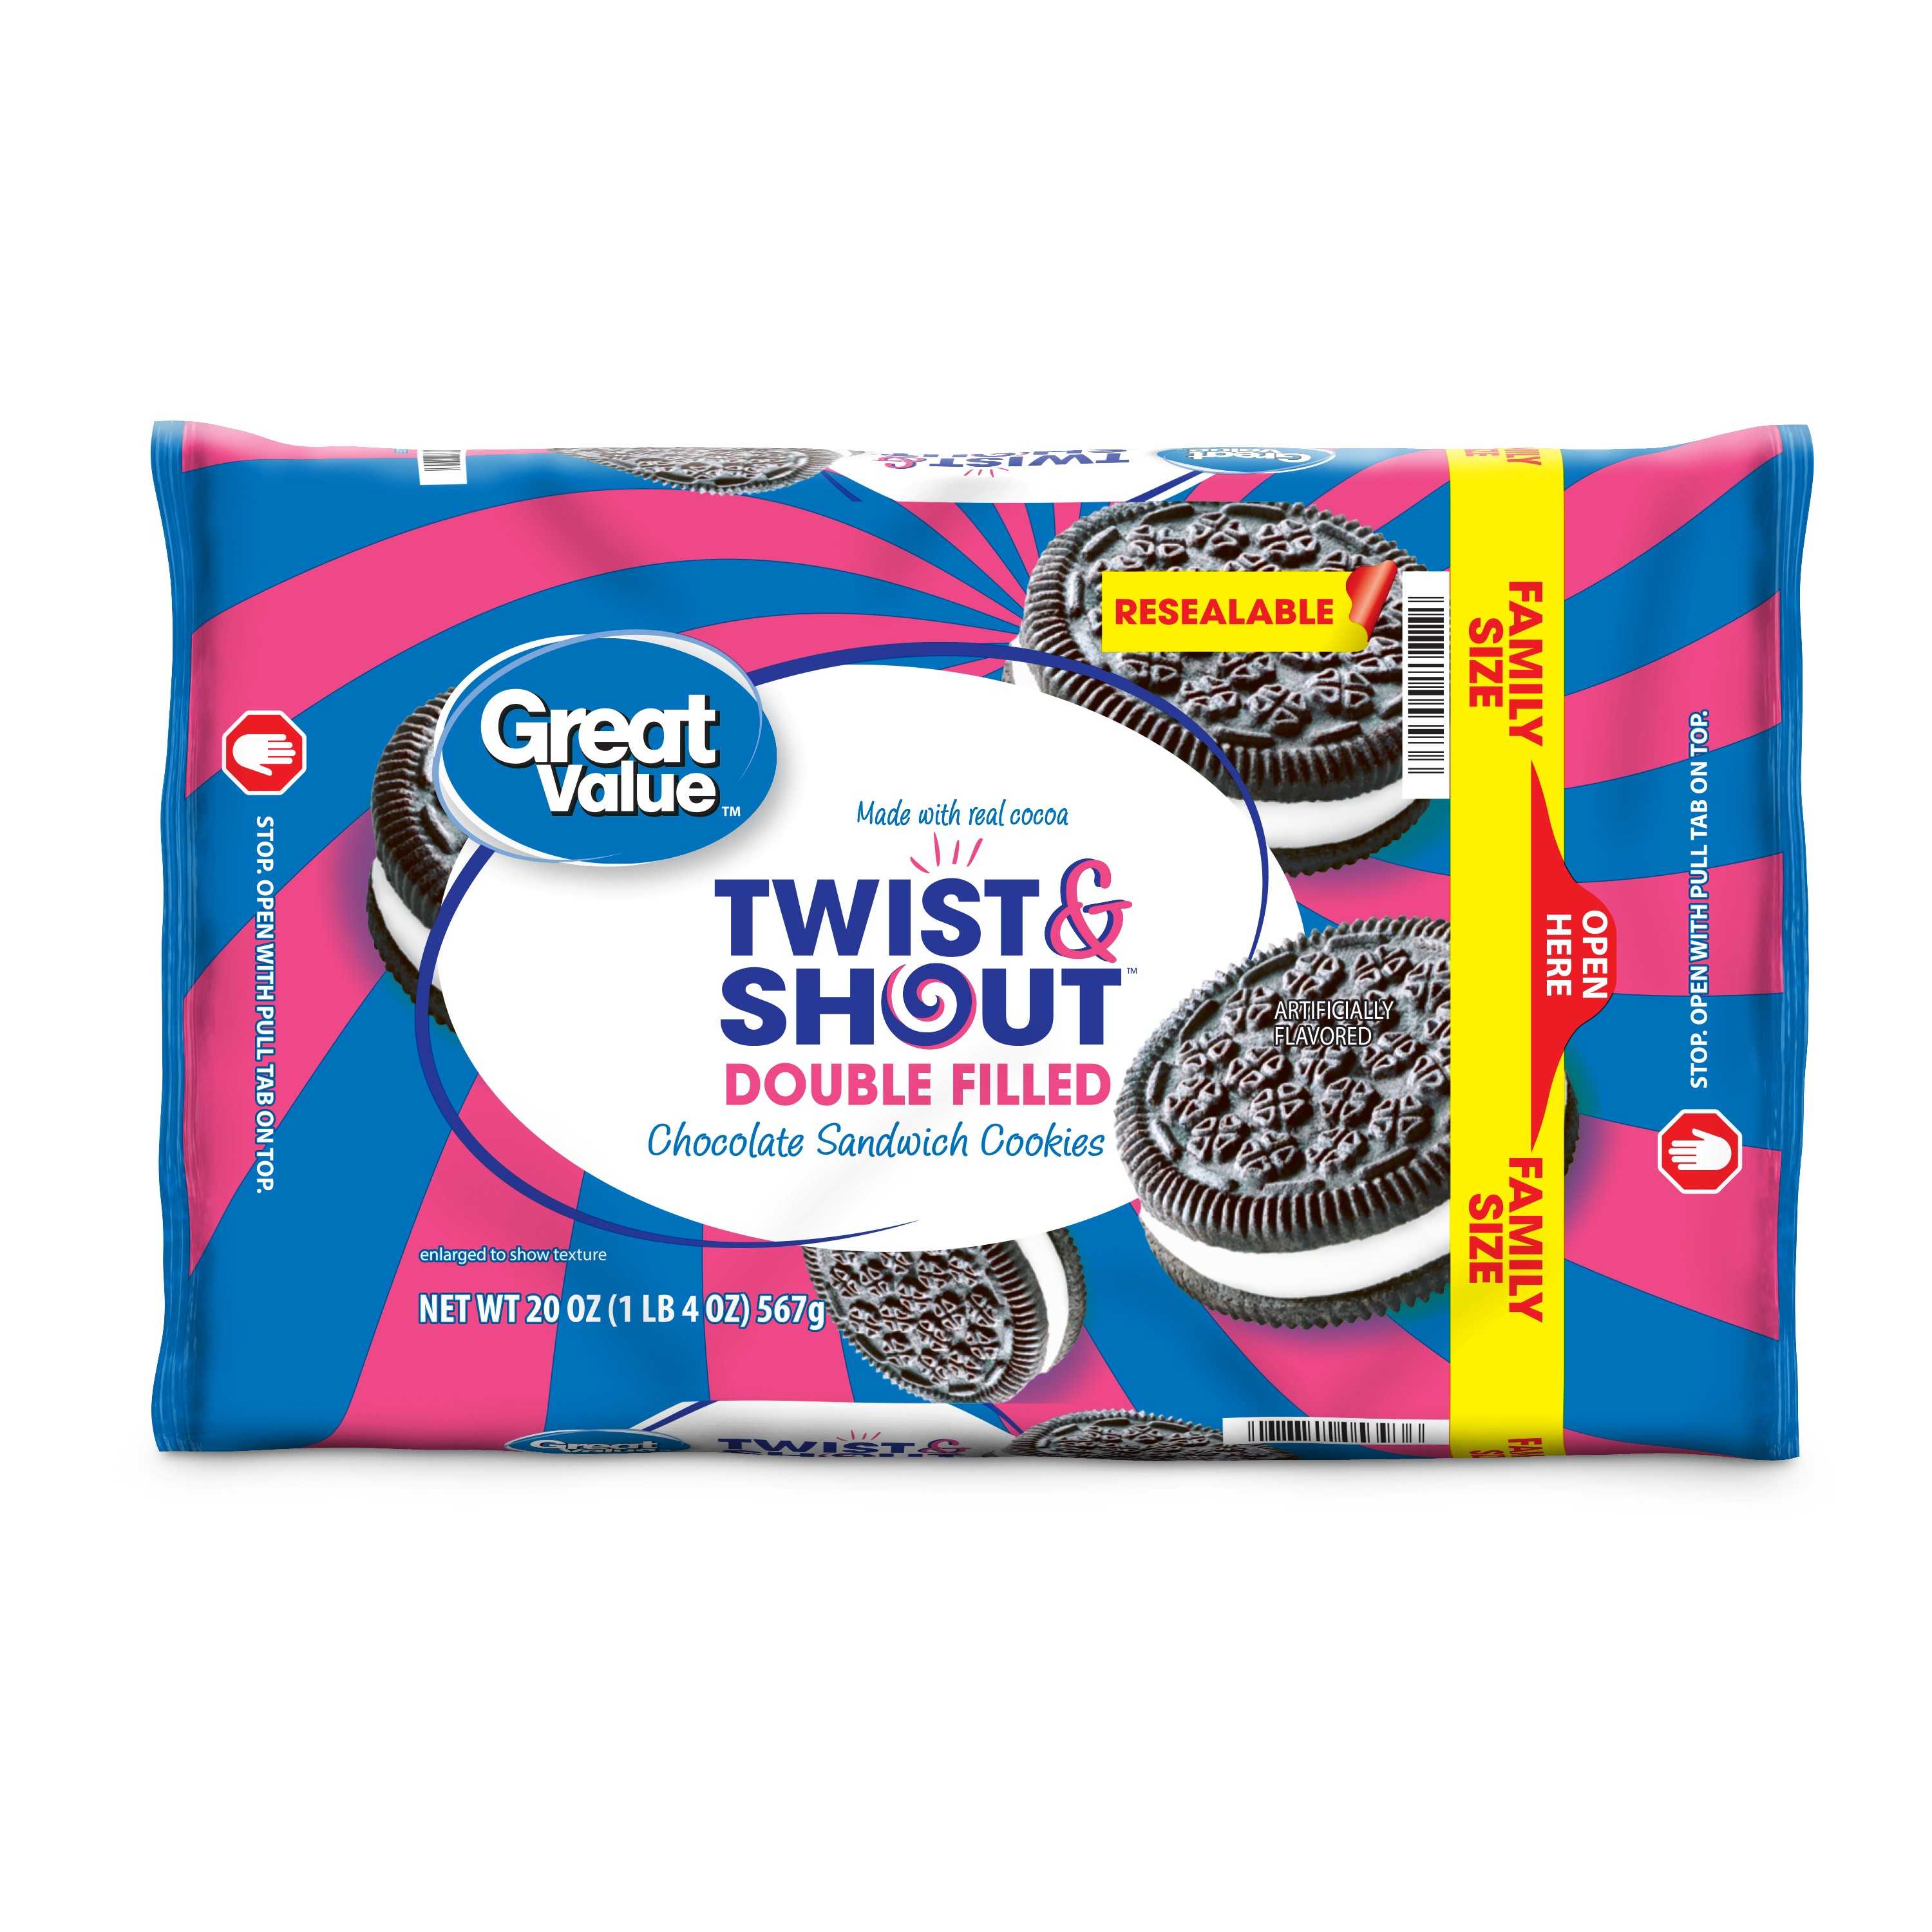 Great Value Twist & Shout Double Filled Chocolate Sandwich Cookies, 20 oz